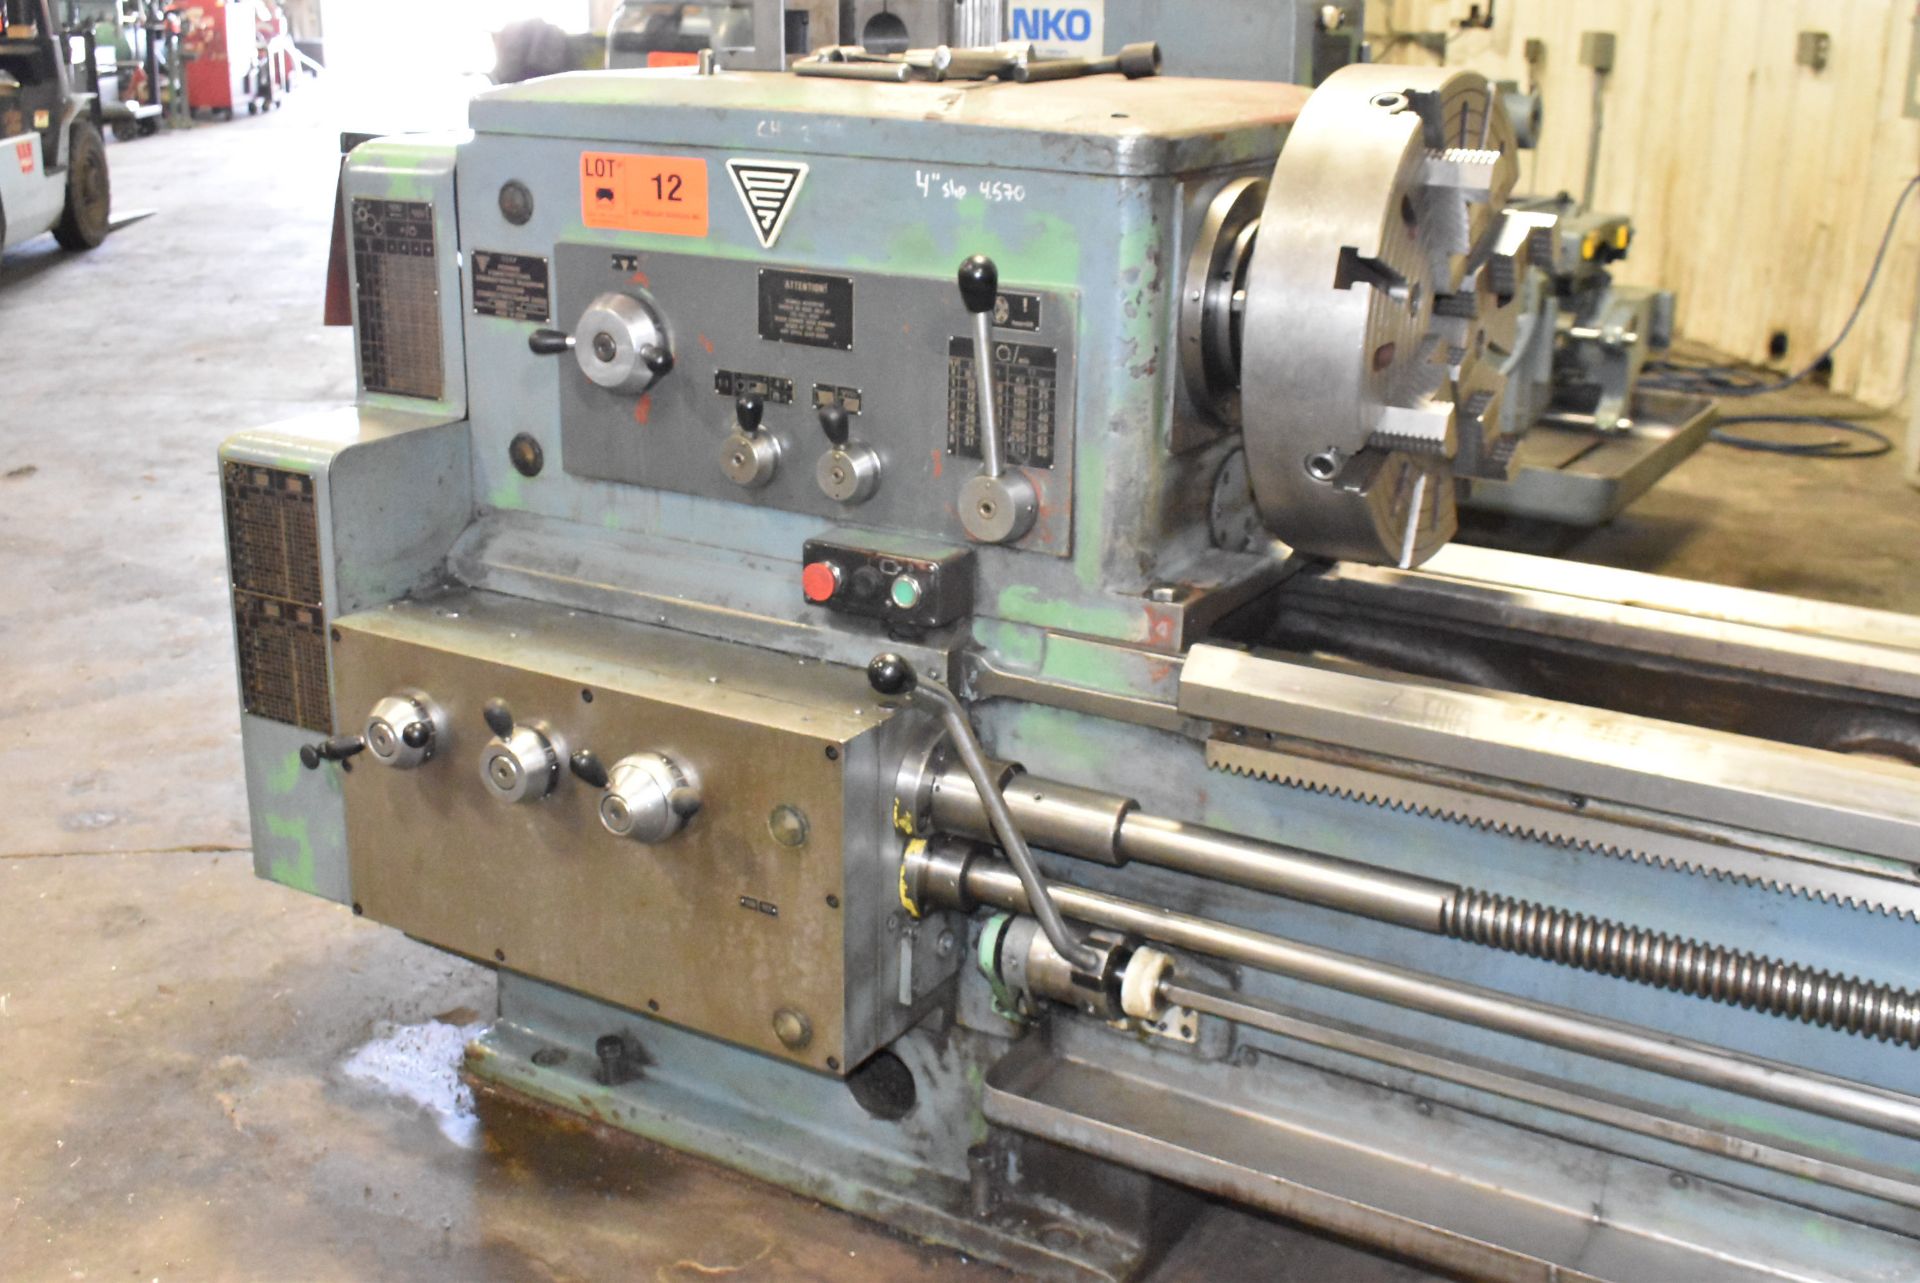 STANKO 1M63B-1 ENGINE LATHE WITH 30.5" SWING OVER BED, 62" DISTANCE BETWEEN CENTERS, 3.25" SPINDLE - Image 3 of 10